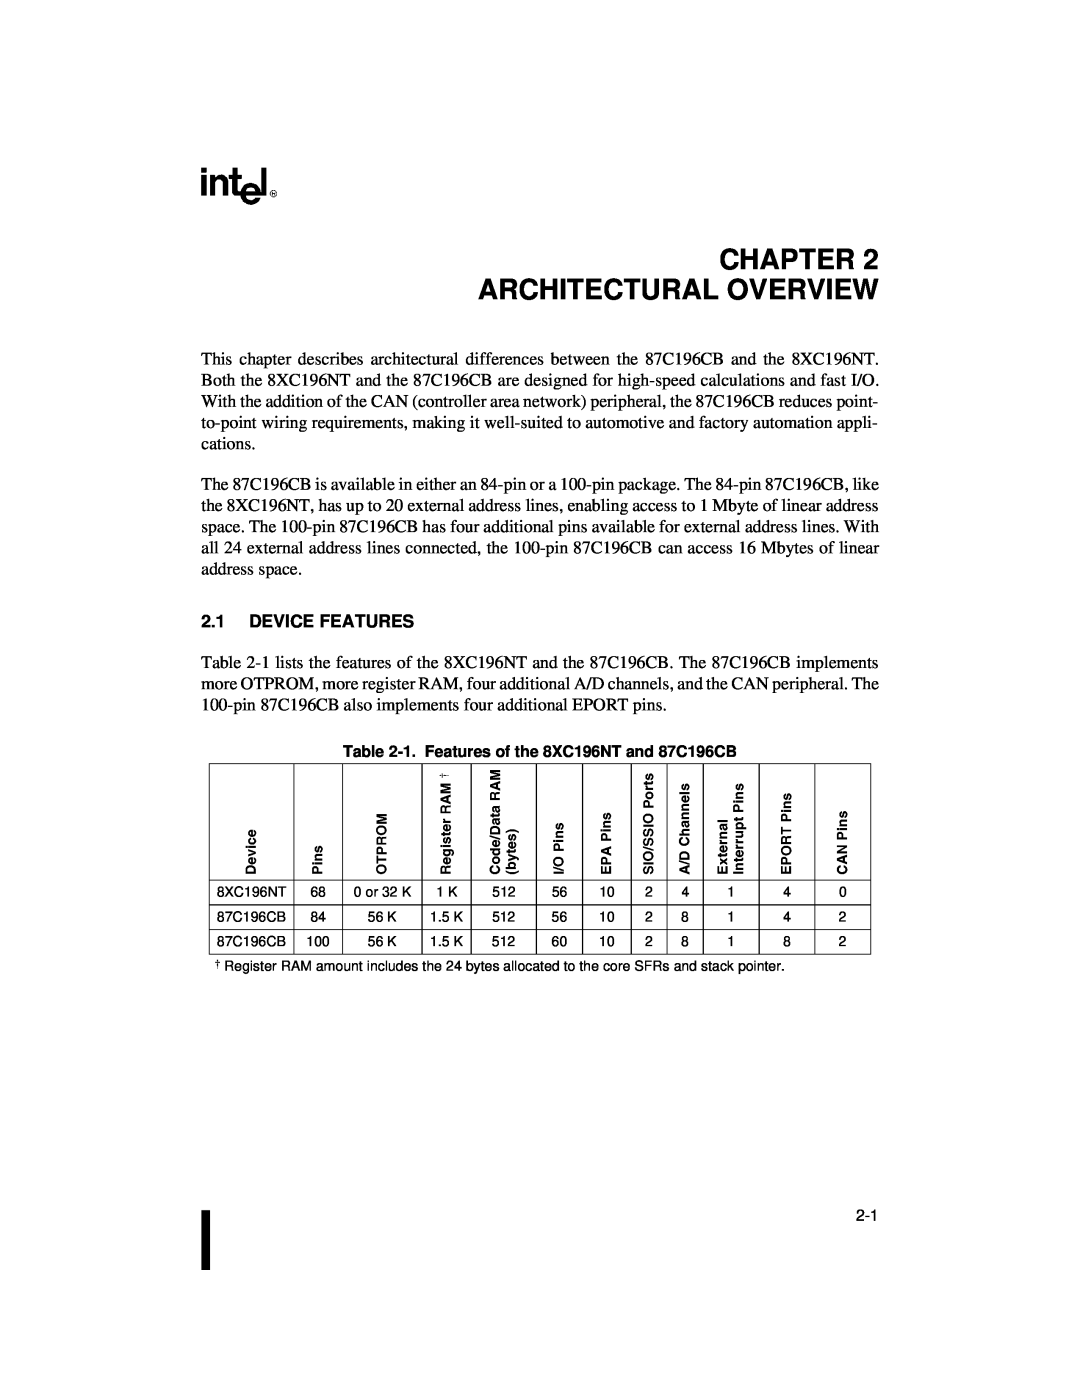 Intel 87C196CB, 8XC196NT user manual Chapter Architectural Overview, Device Features 